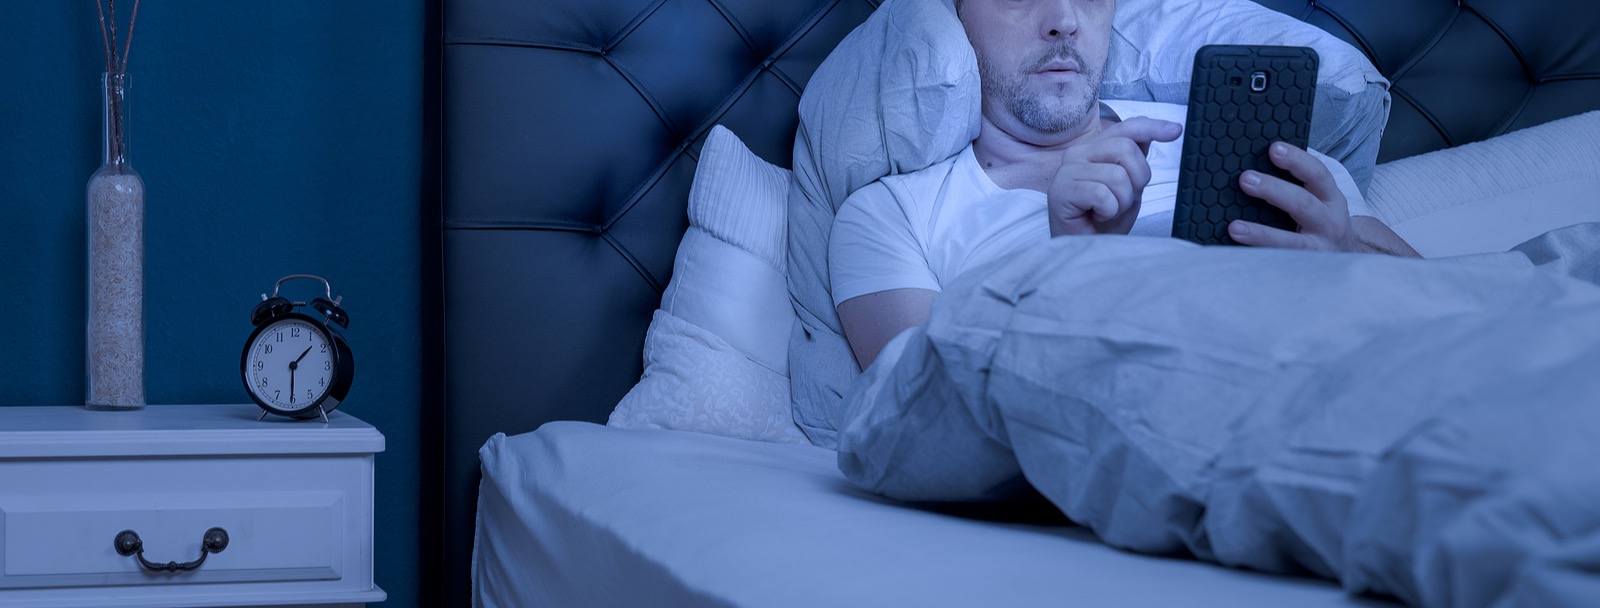 Man lying in bed on his phone representing the struggle with insomnia. Insomnia can lead to a breakdown in both physical and mental health. If you are struggling insomnia treatment in Arizona can help restore your sleep routine.